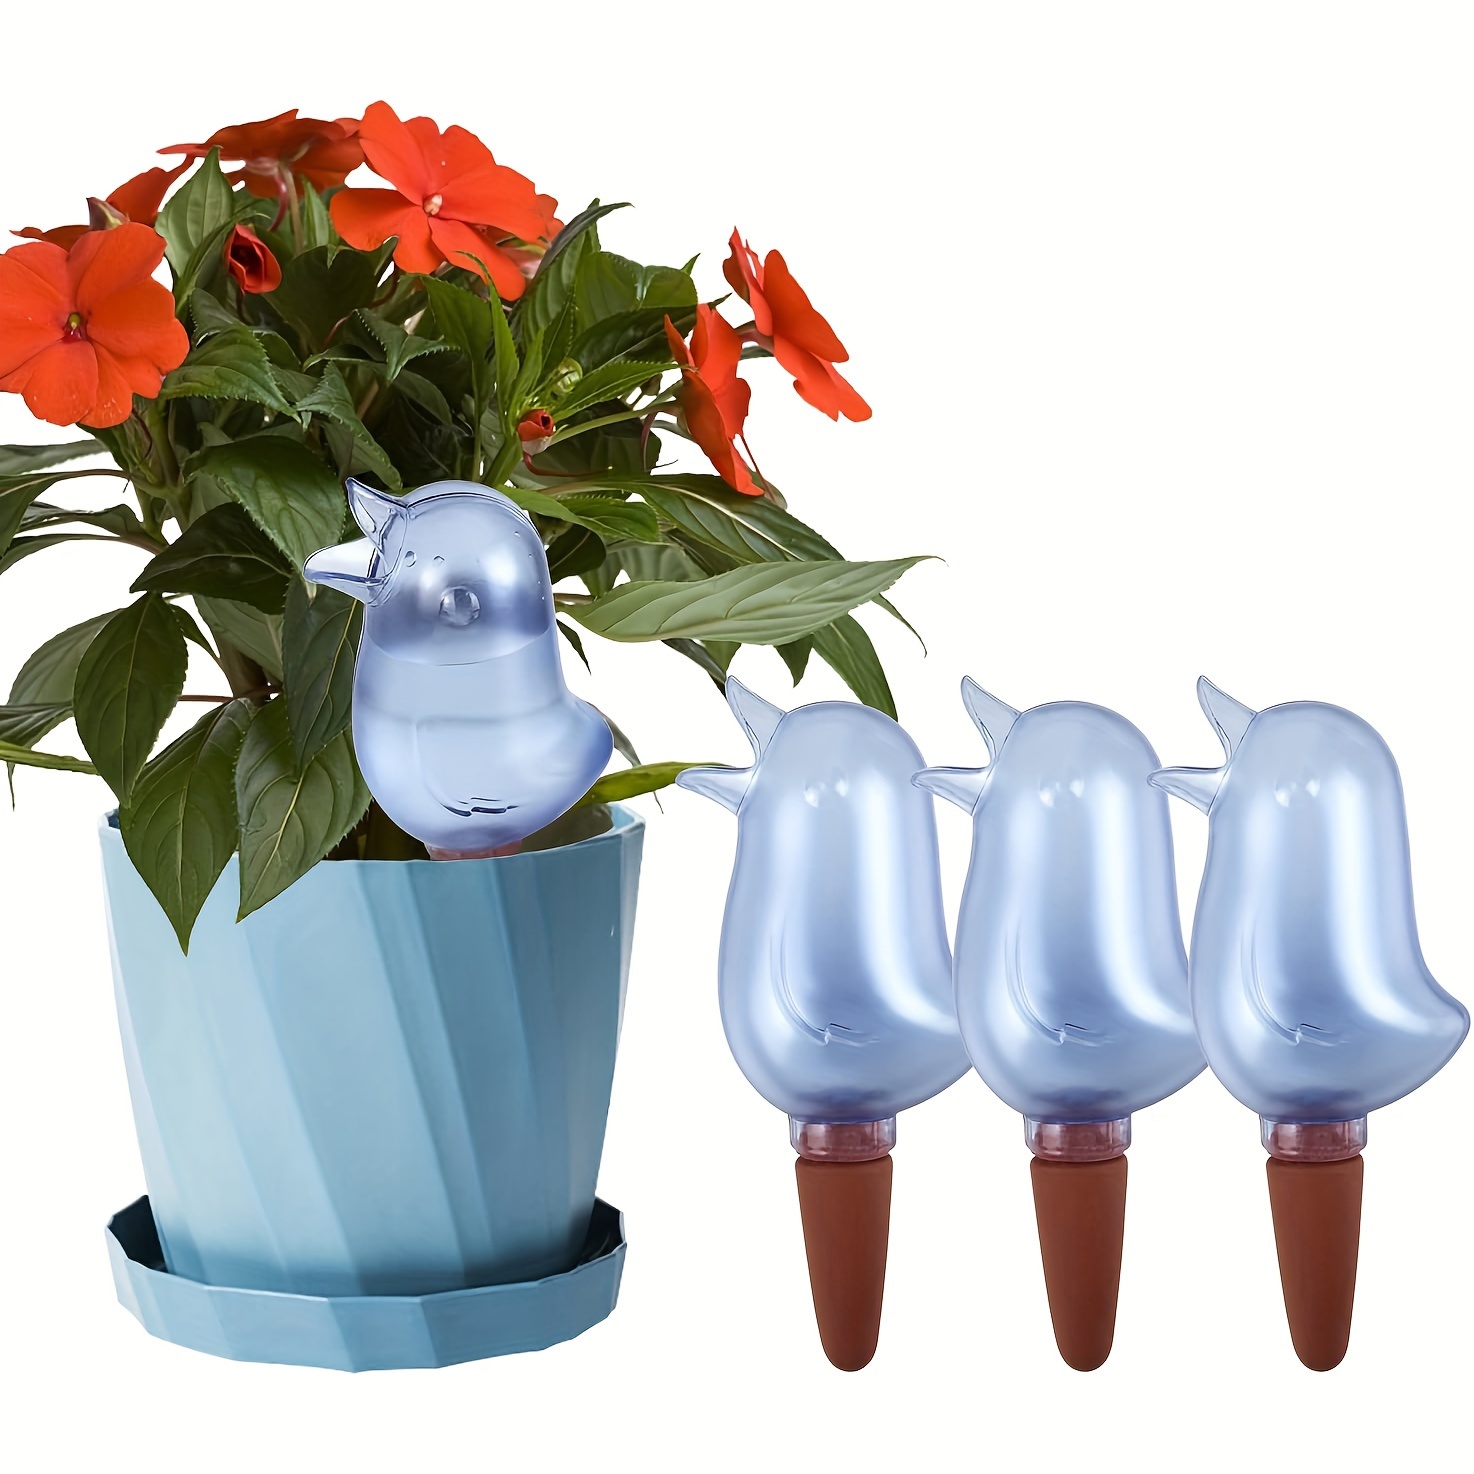 

precision Drip" 4-piece Automatic Self-watering Spikes - Easy Plant Waterer System For Indoor & Outdoor Potted Plants And Flowers